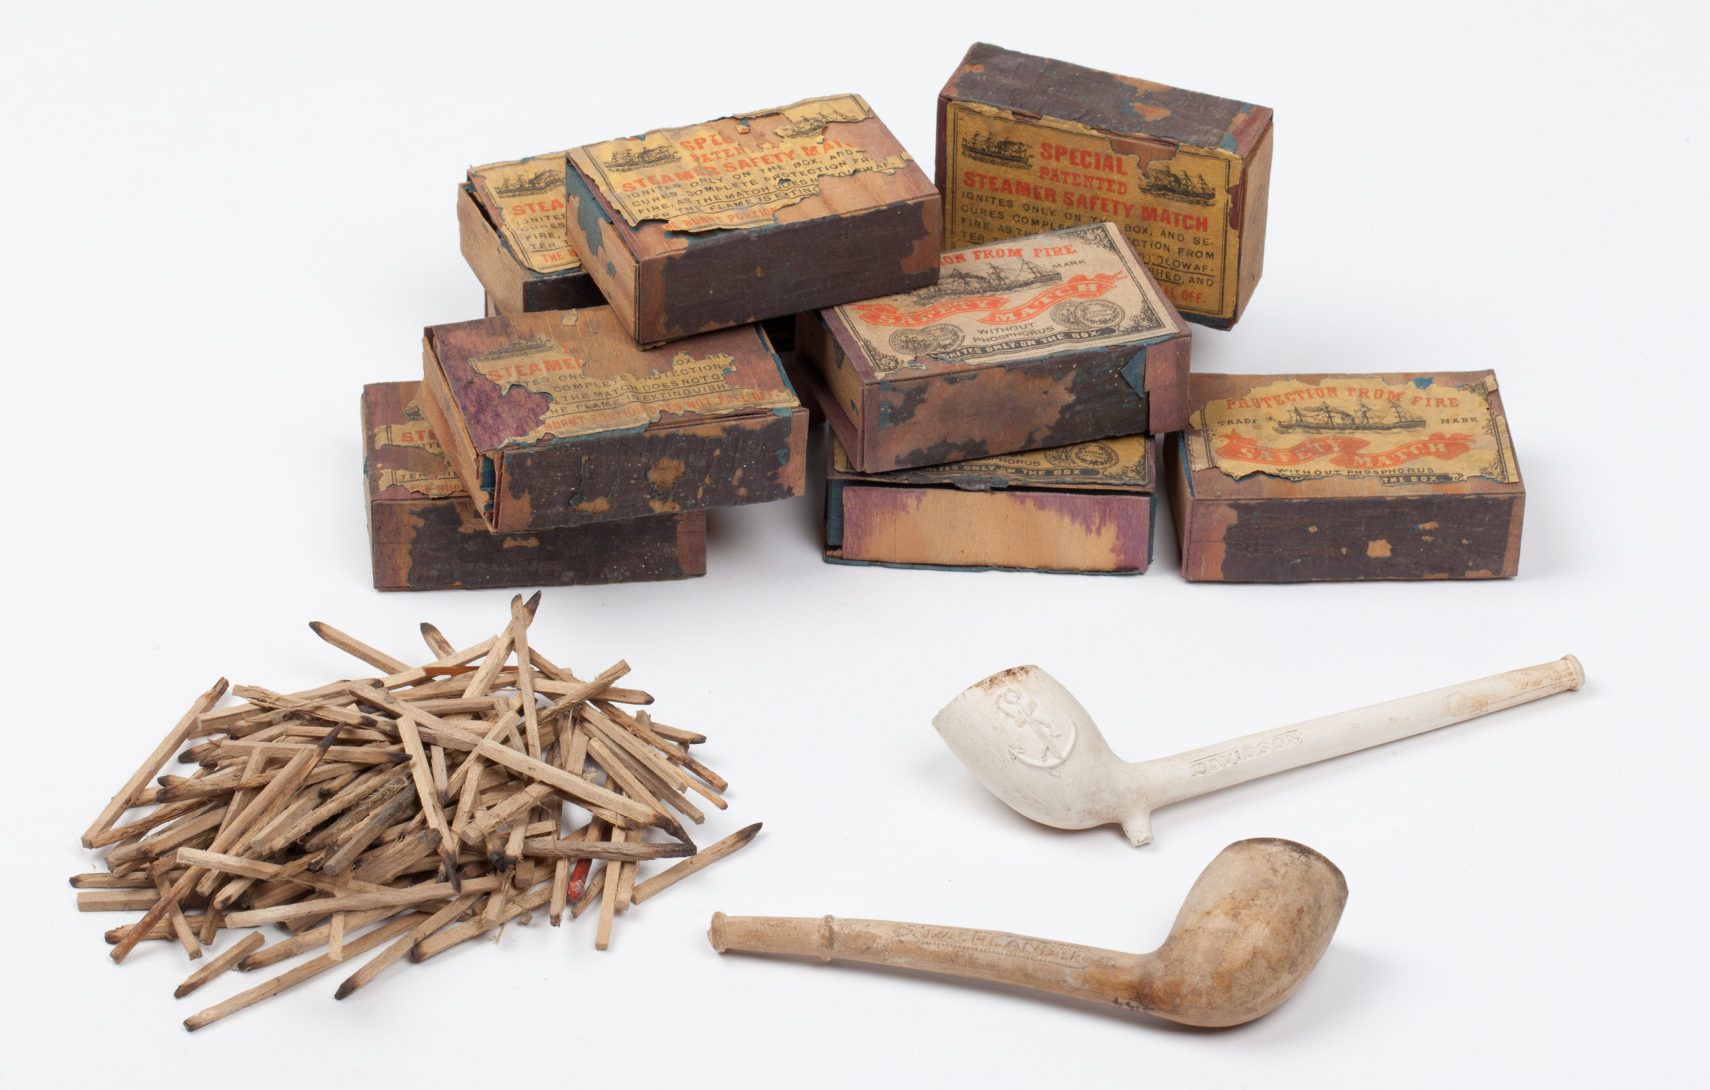 Matches, twp pipes and several boxes of mathes on a white background